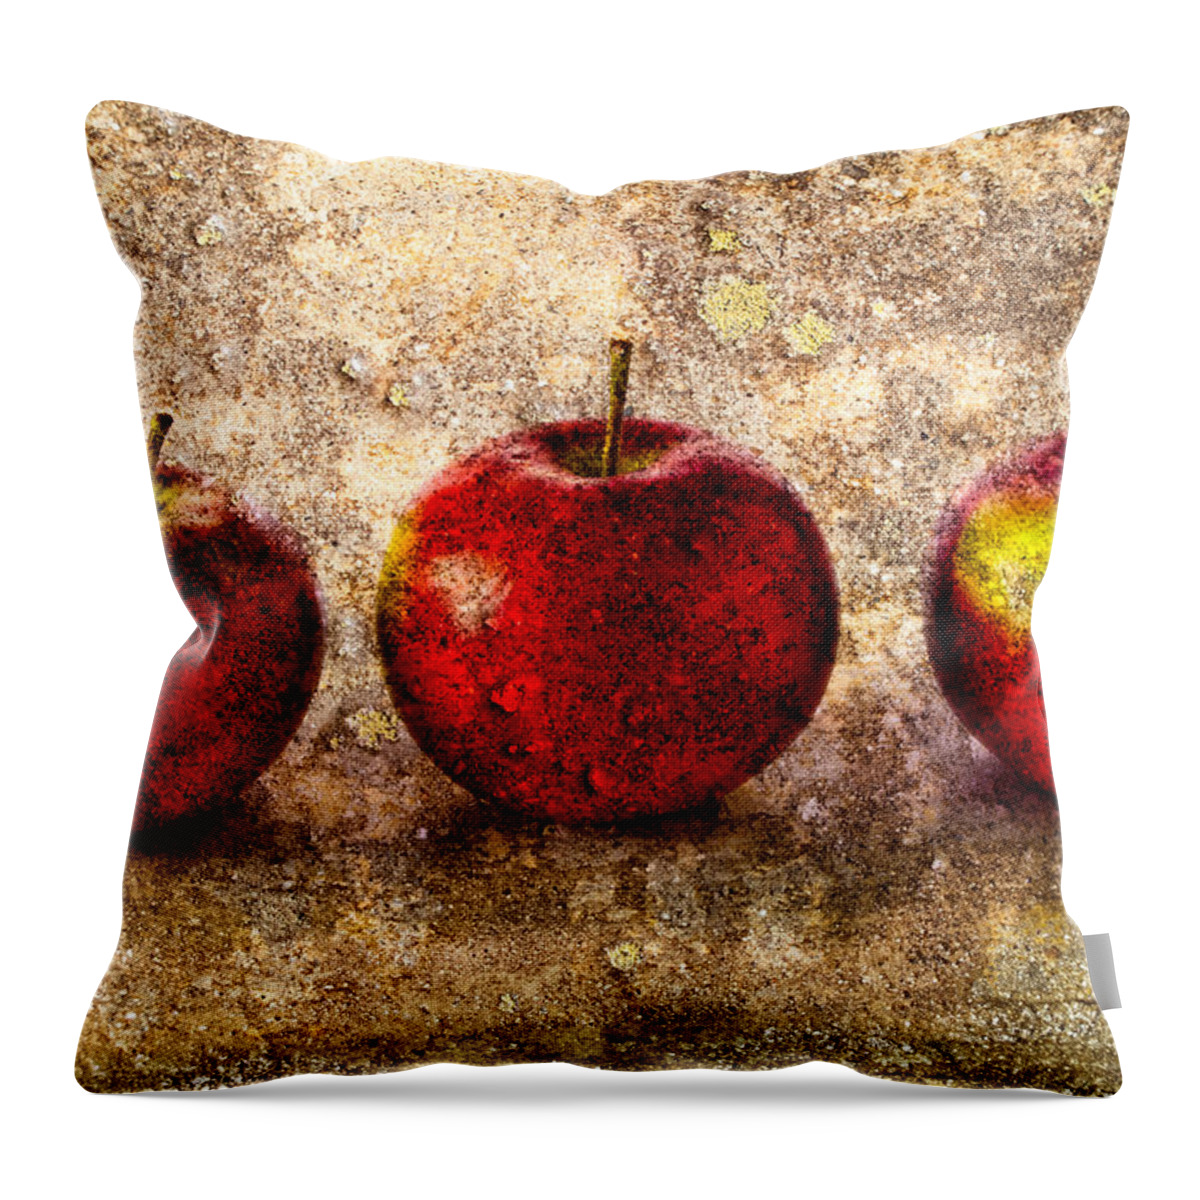 Apple Throw Pillow featuring the photograph Apple by Bob Orsillo